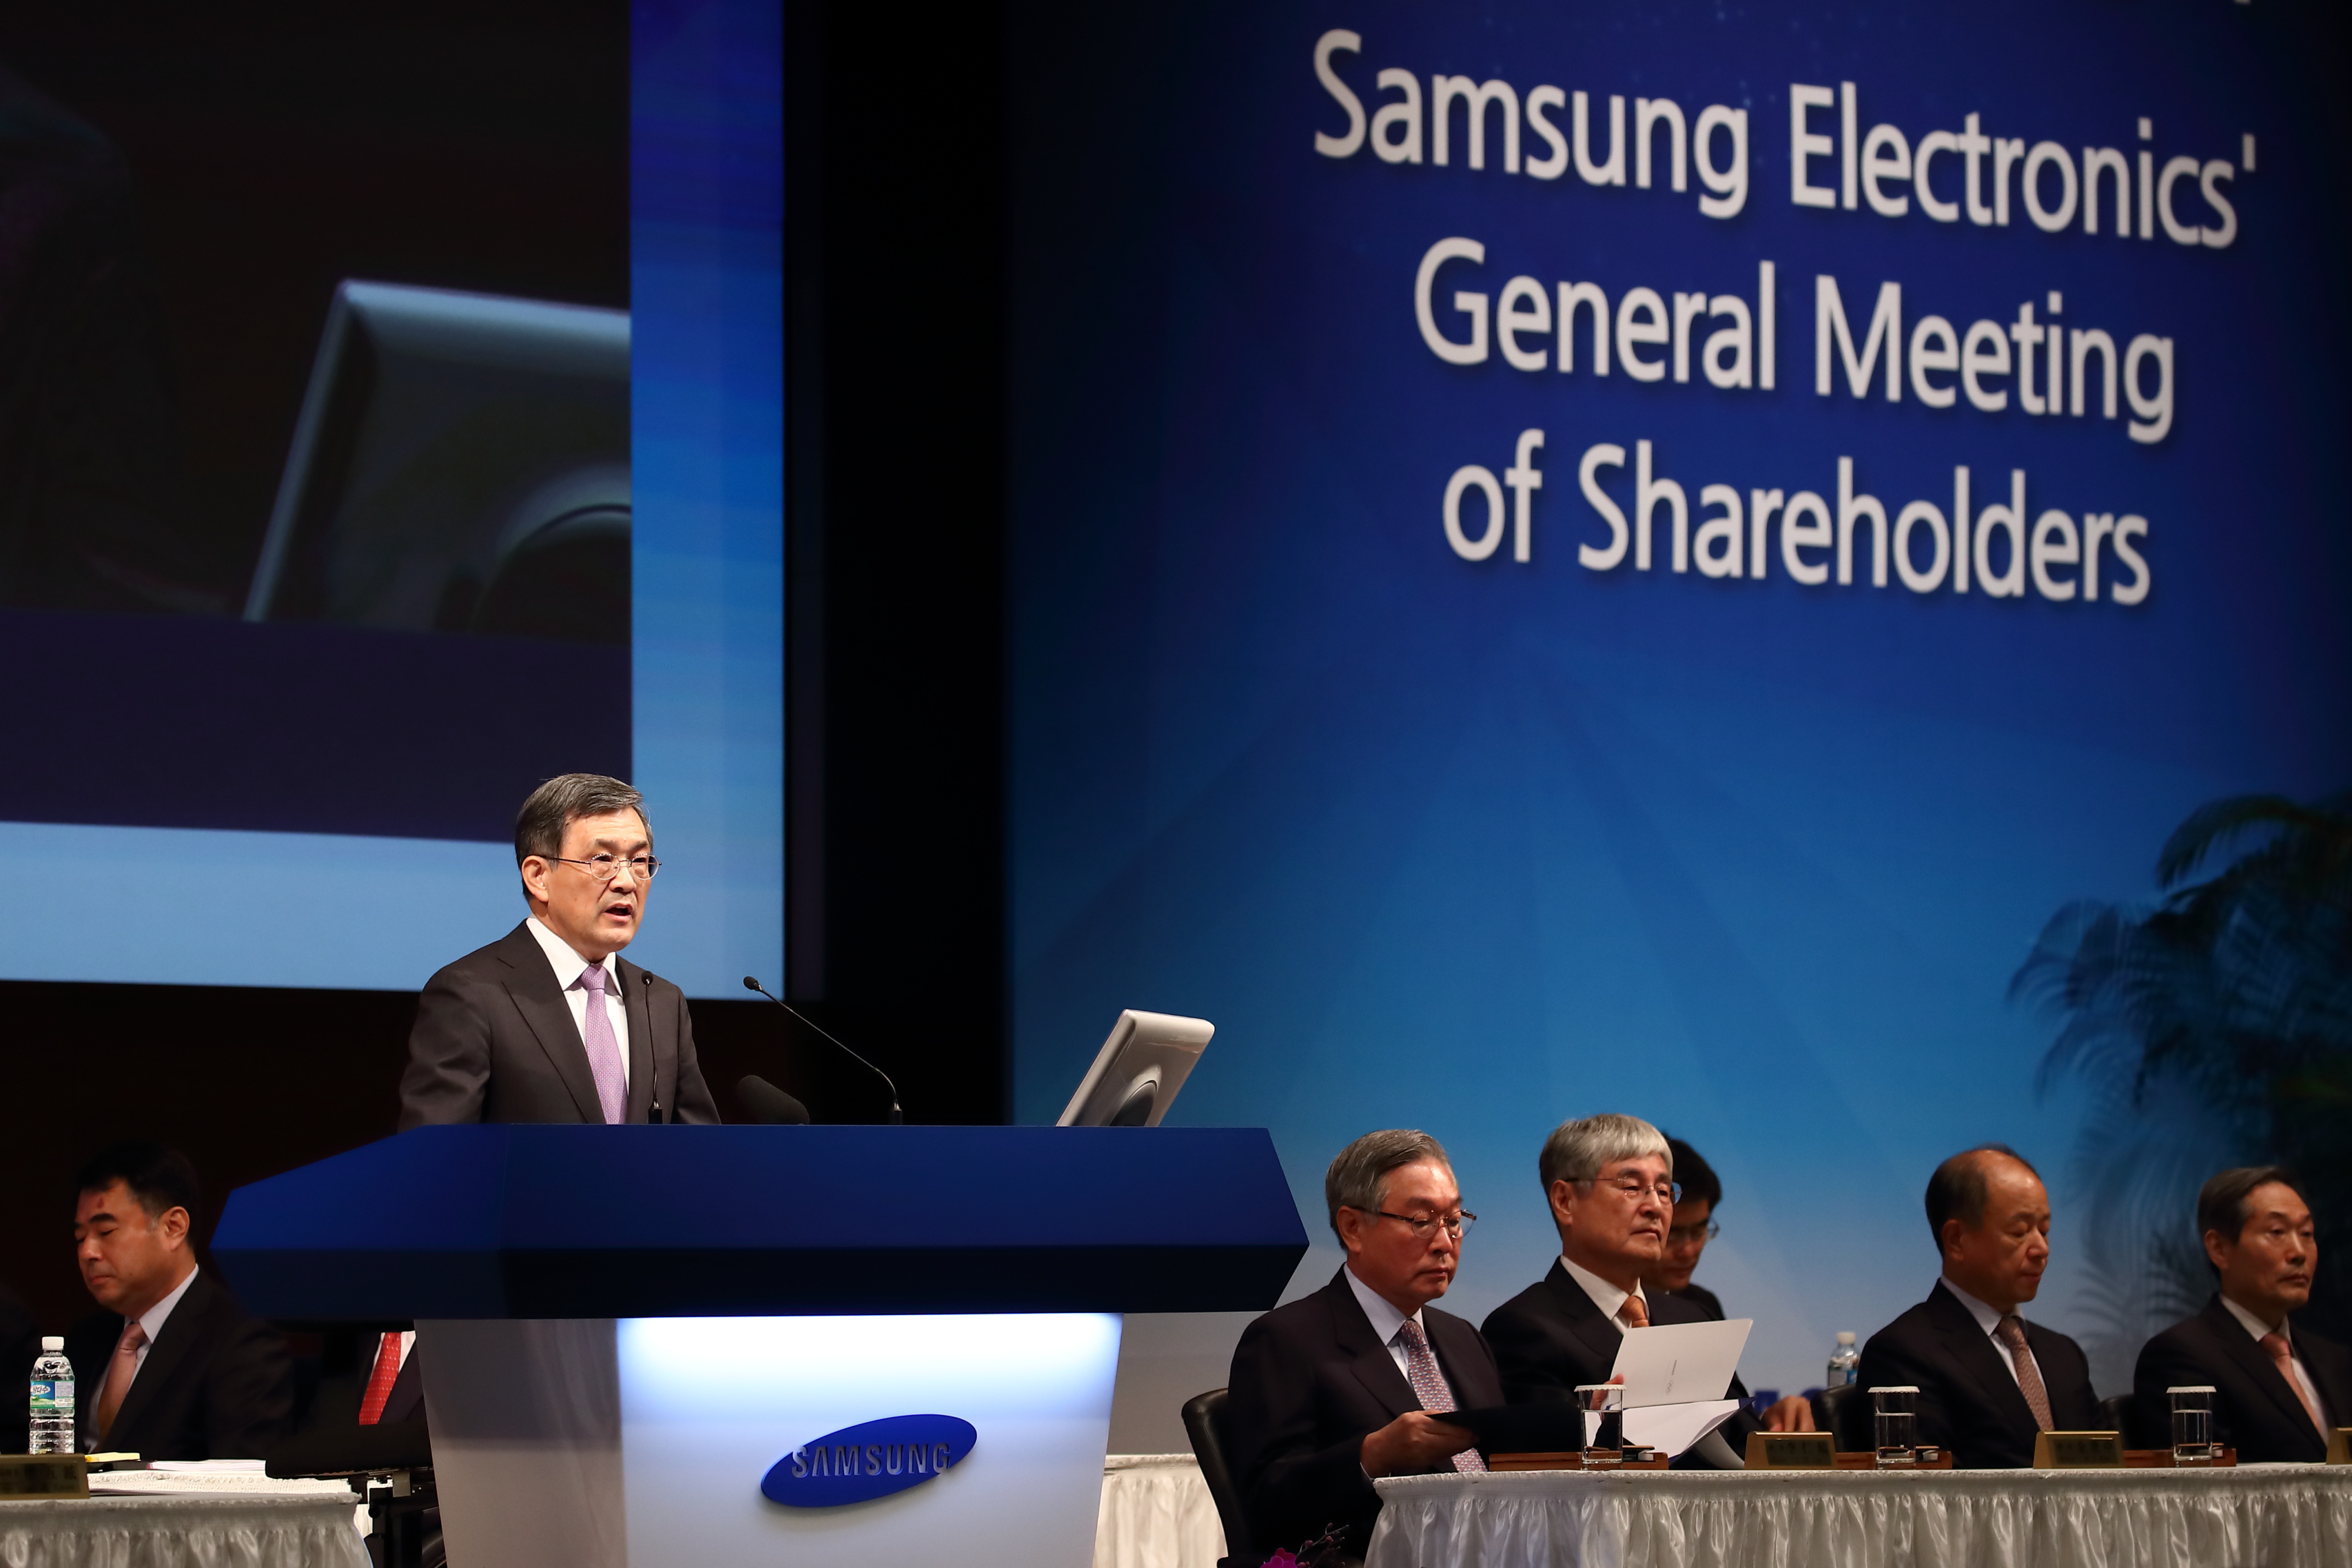 Kwon Oh-Hyun, co-vice chairman and co-chief executive officer of Samsung, speaks during the company's extraordinary general meeting of shareholders at the Seocho office building in Seoul on October 27, 2016.  Samsung Electronics on October 27 reported an expected 30 percent profit plunge on the back of a highly damaging recall crisis that hammered the reputation of the world's largest smartphone maker. / AFP PHOTO / POOL / SeongJoon Cho